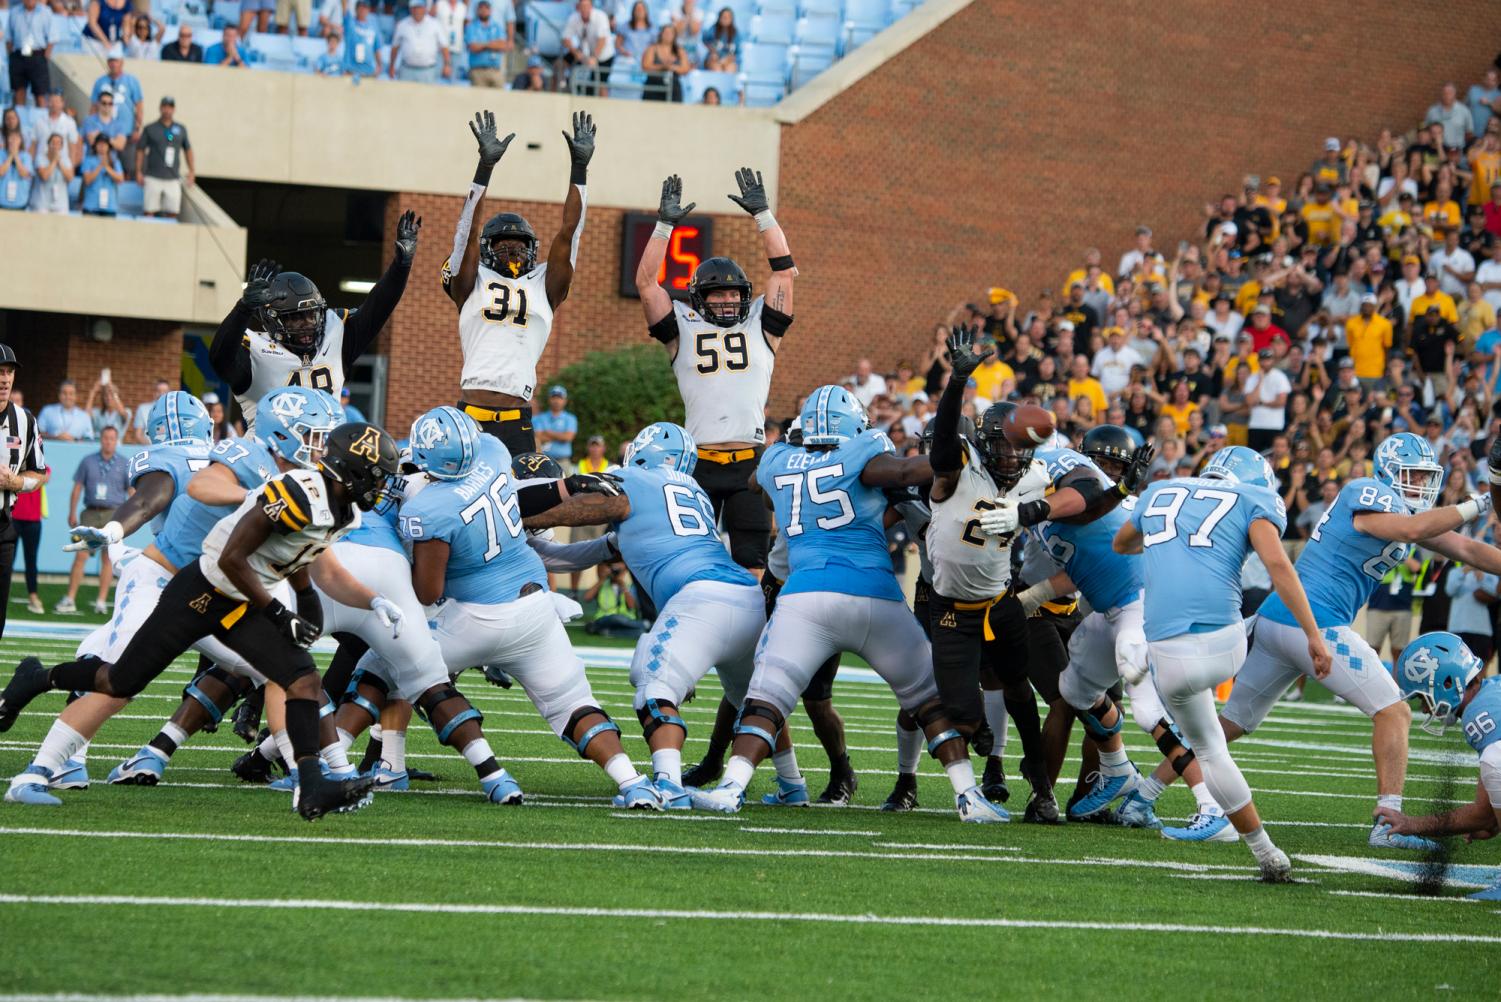 App State defeats UNC in historic 3431 win The Appalachian